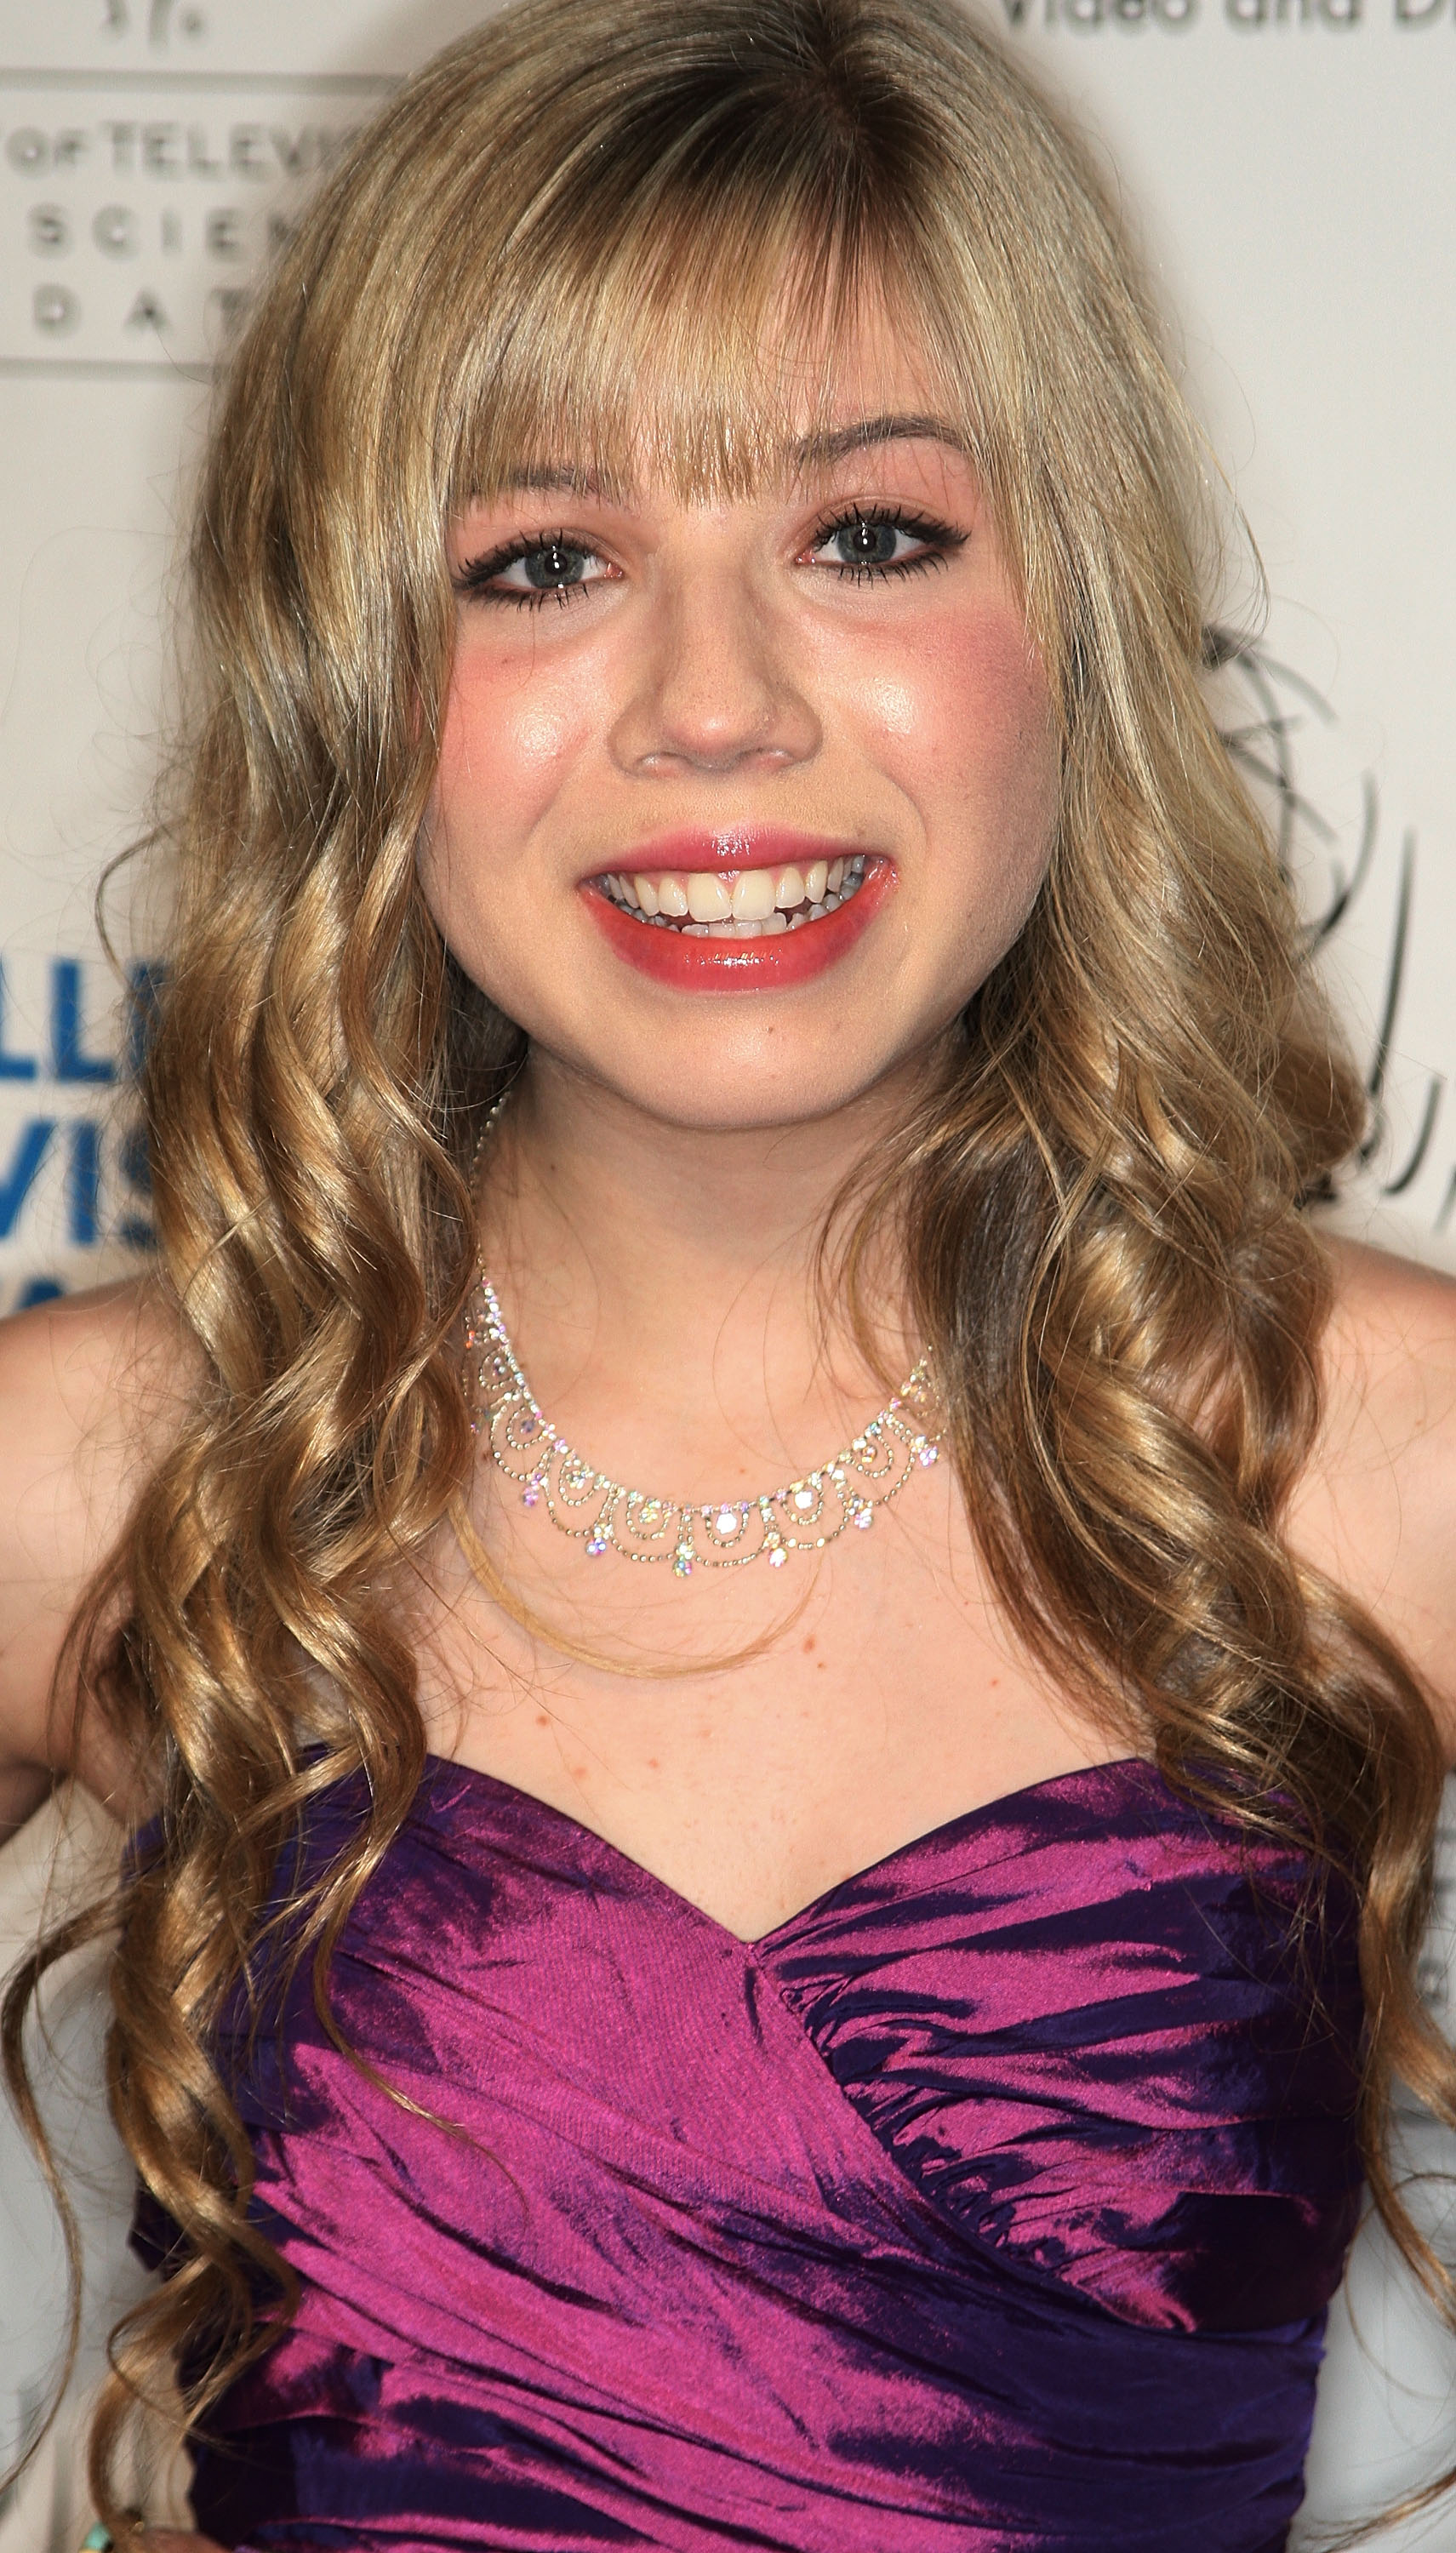 Jennette McCurdy attends the 30th Annual College Television Awards Gala on March 21, 2009 in Culver City, California | Source: Getty Images